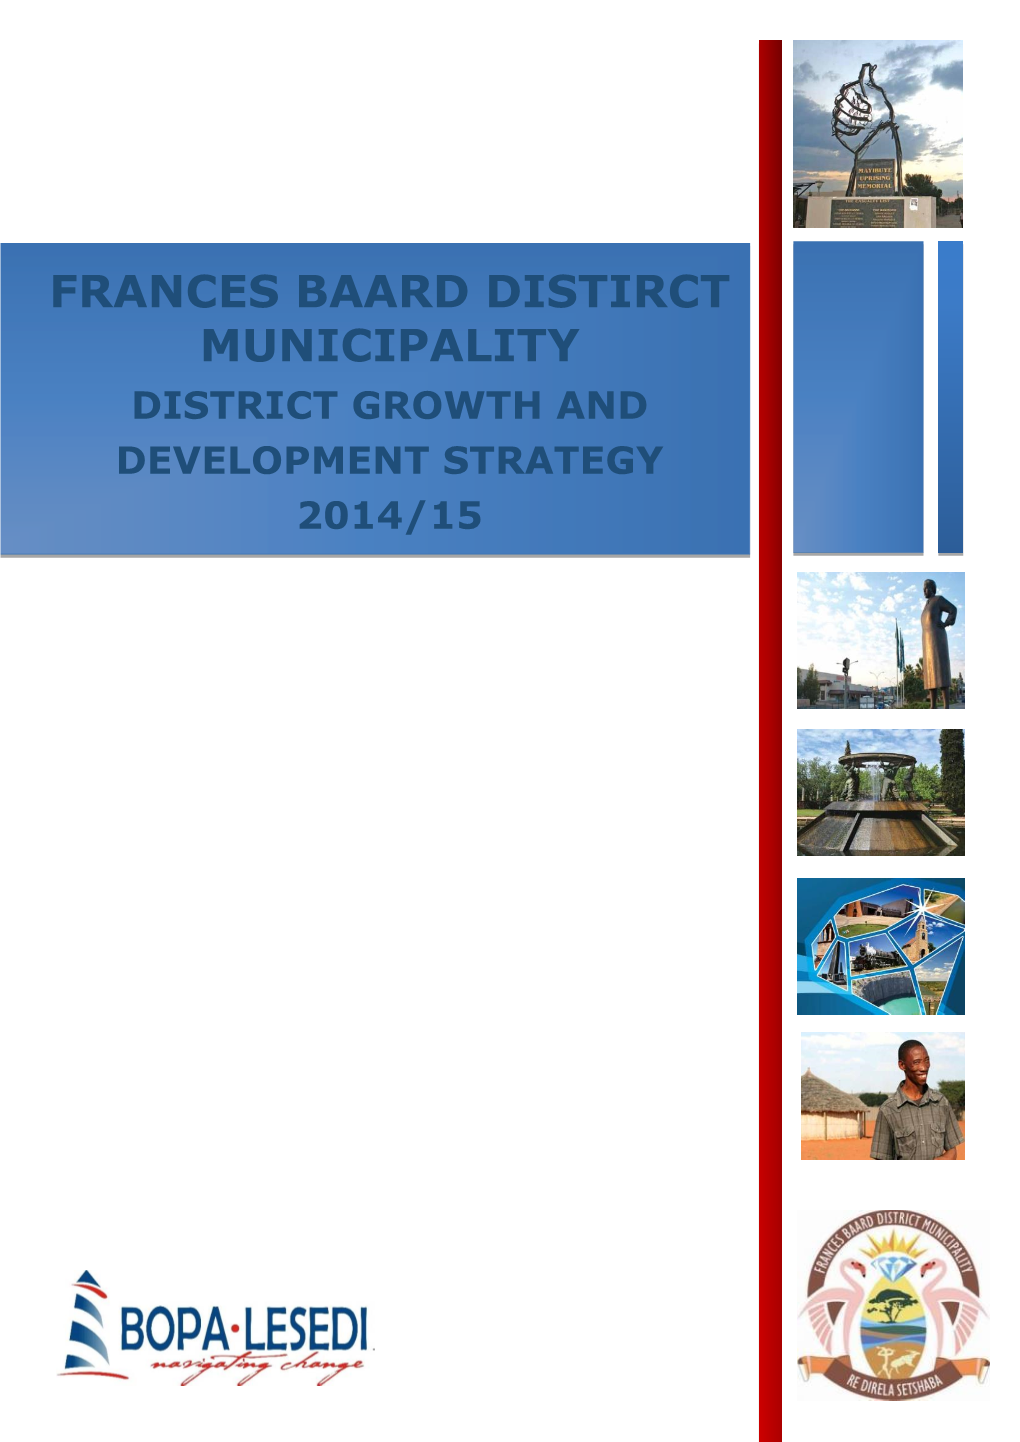 Frances Baard Distirct Municipality District Growth and Development Strategy 2014/15